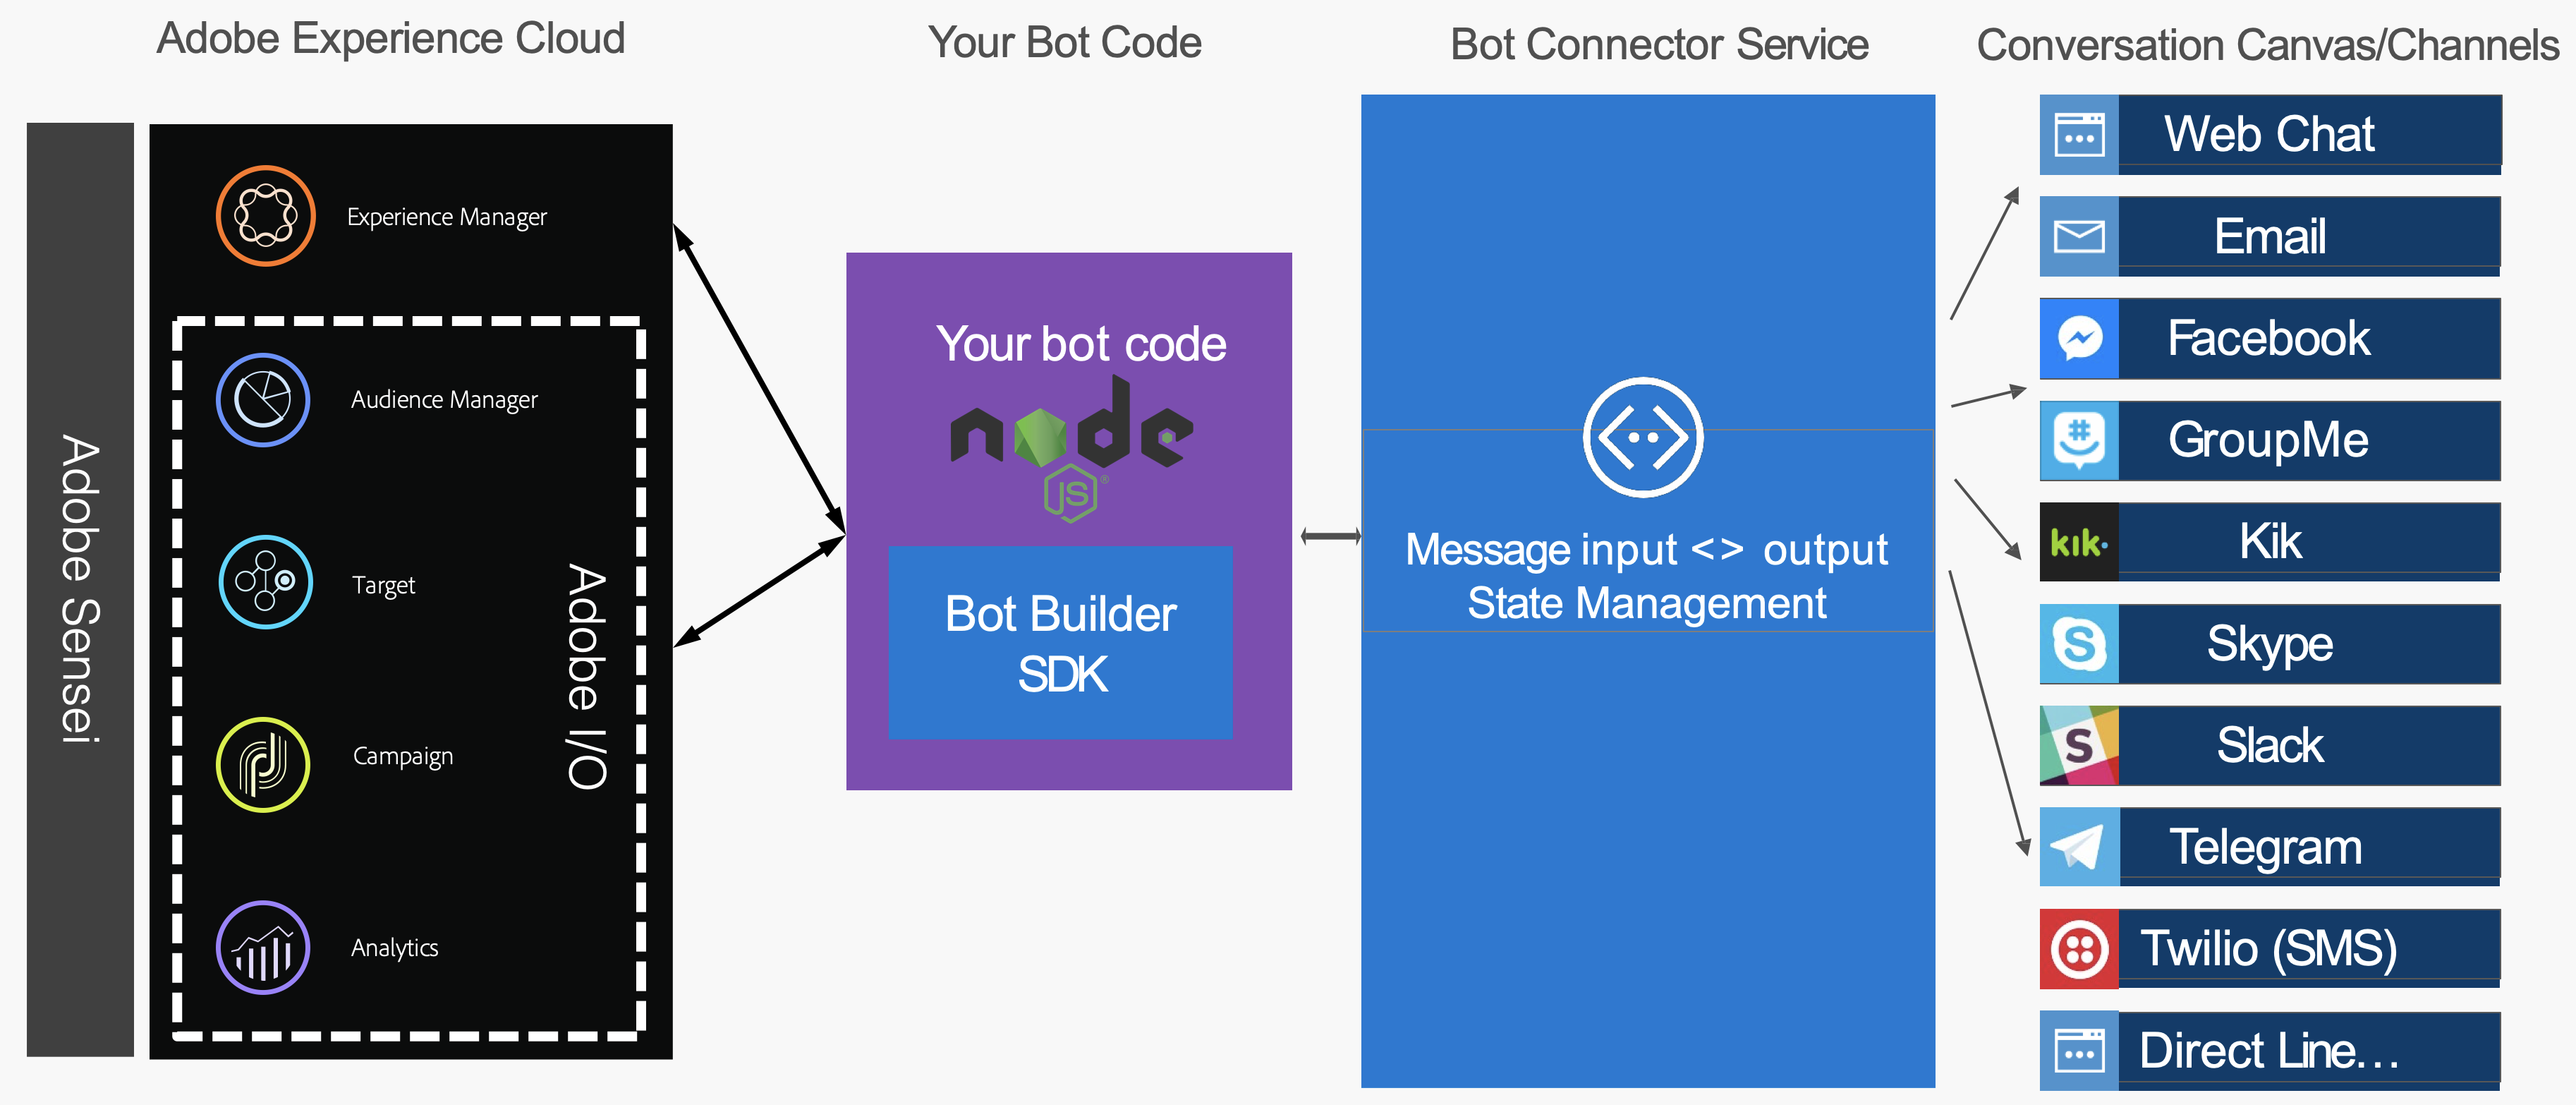 Example Microsoft Bot Framework & Adobe Experience Cloud Architecture